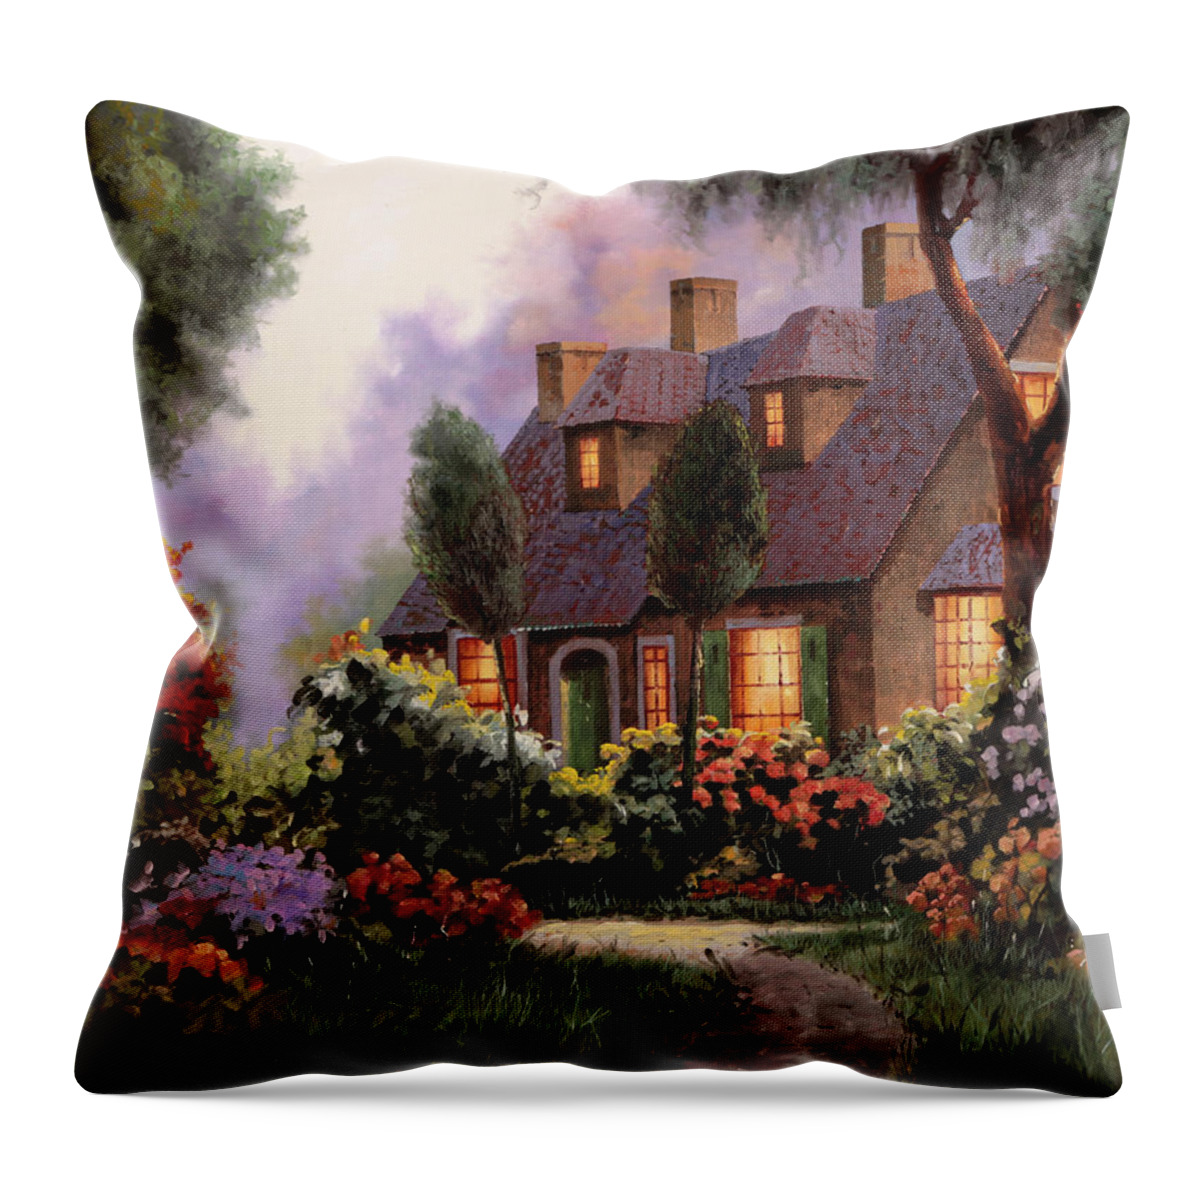 Light Throw Pillow featuring the painting Luci Al Mattino by Guido Borelli